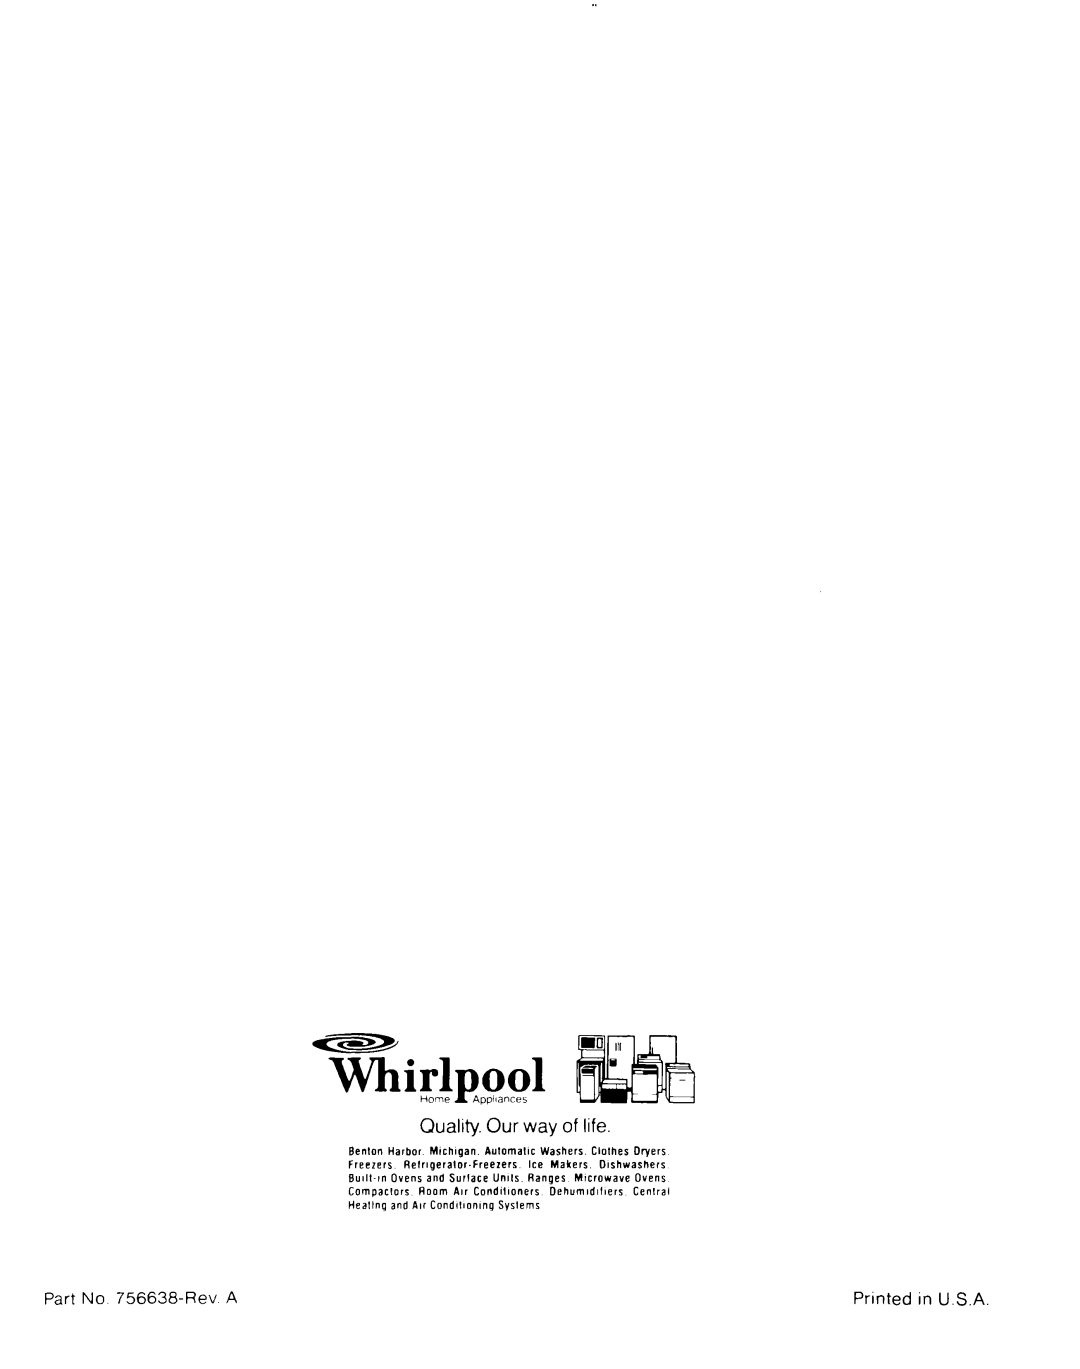 Whirlpool 50 manual Quality. Our way of life, Part No 756638-Rev 